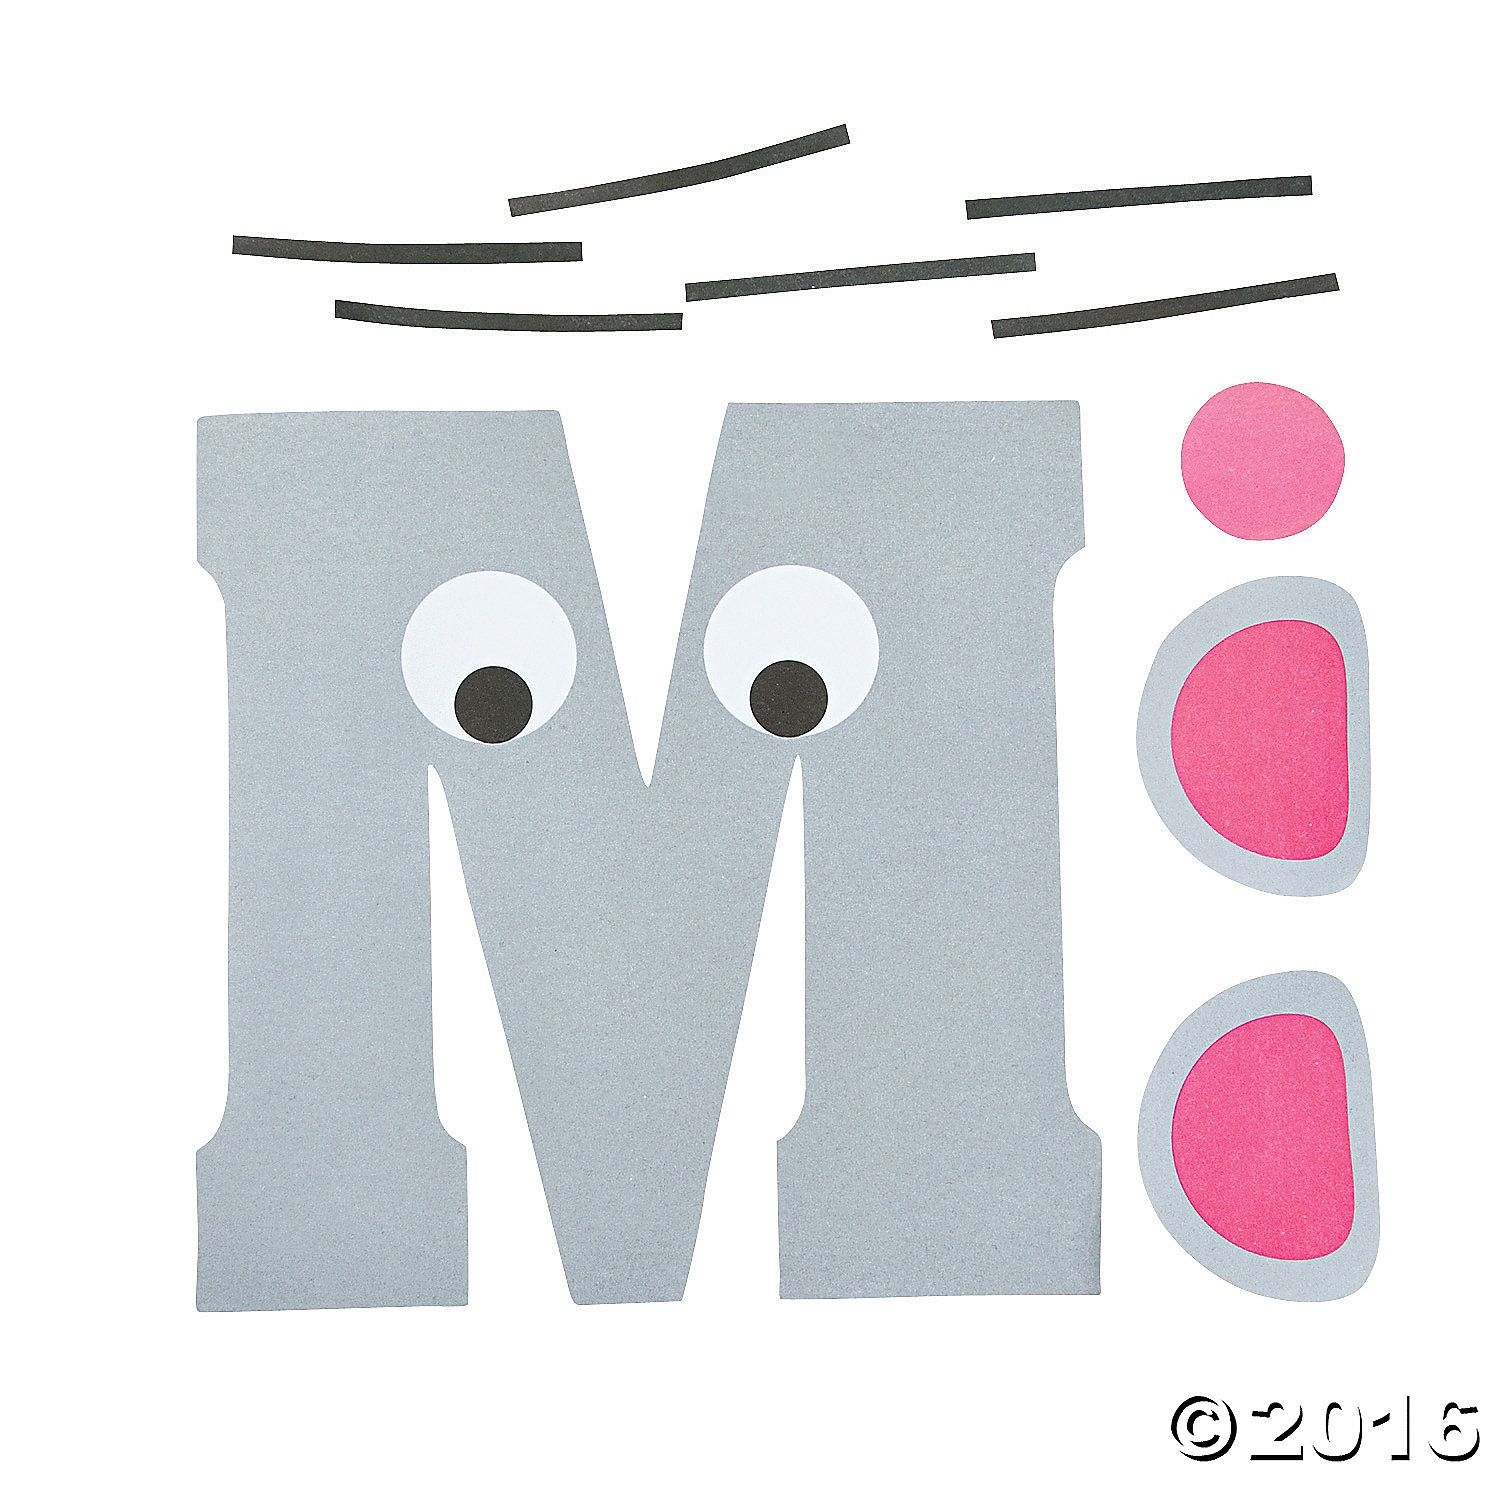 M is for mice letter m craft kit 48 8074 a01 1500 1500 Letter M Crafts M Craft Letter A Crafts